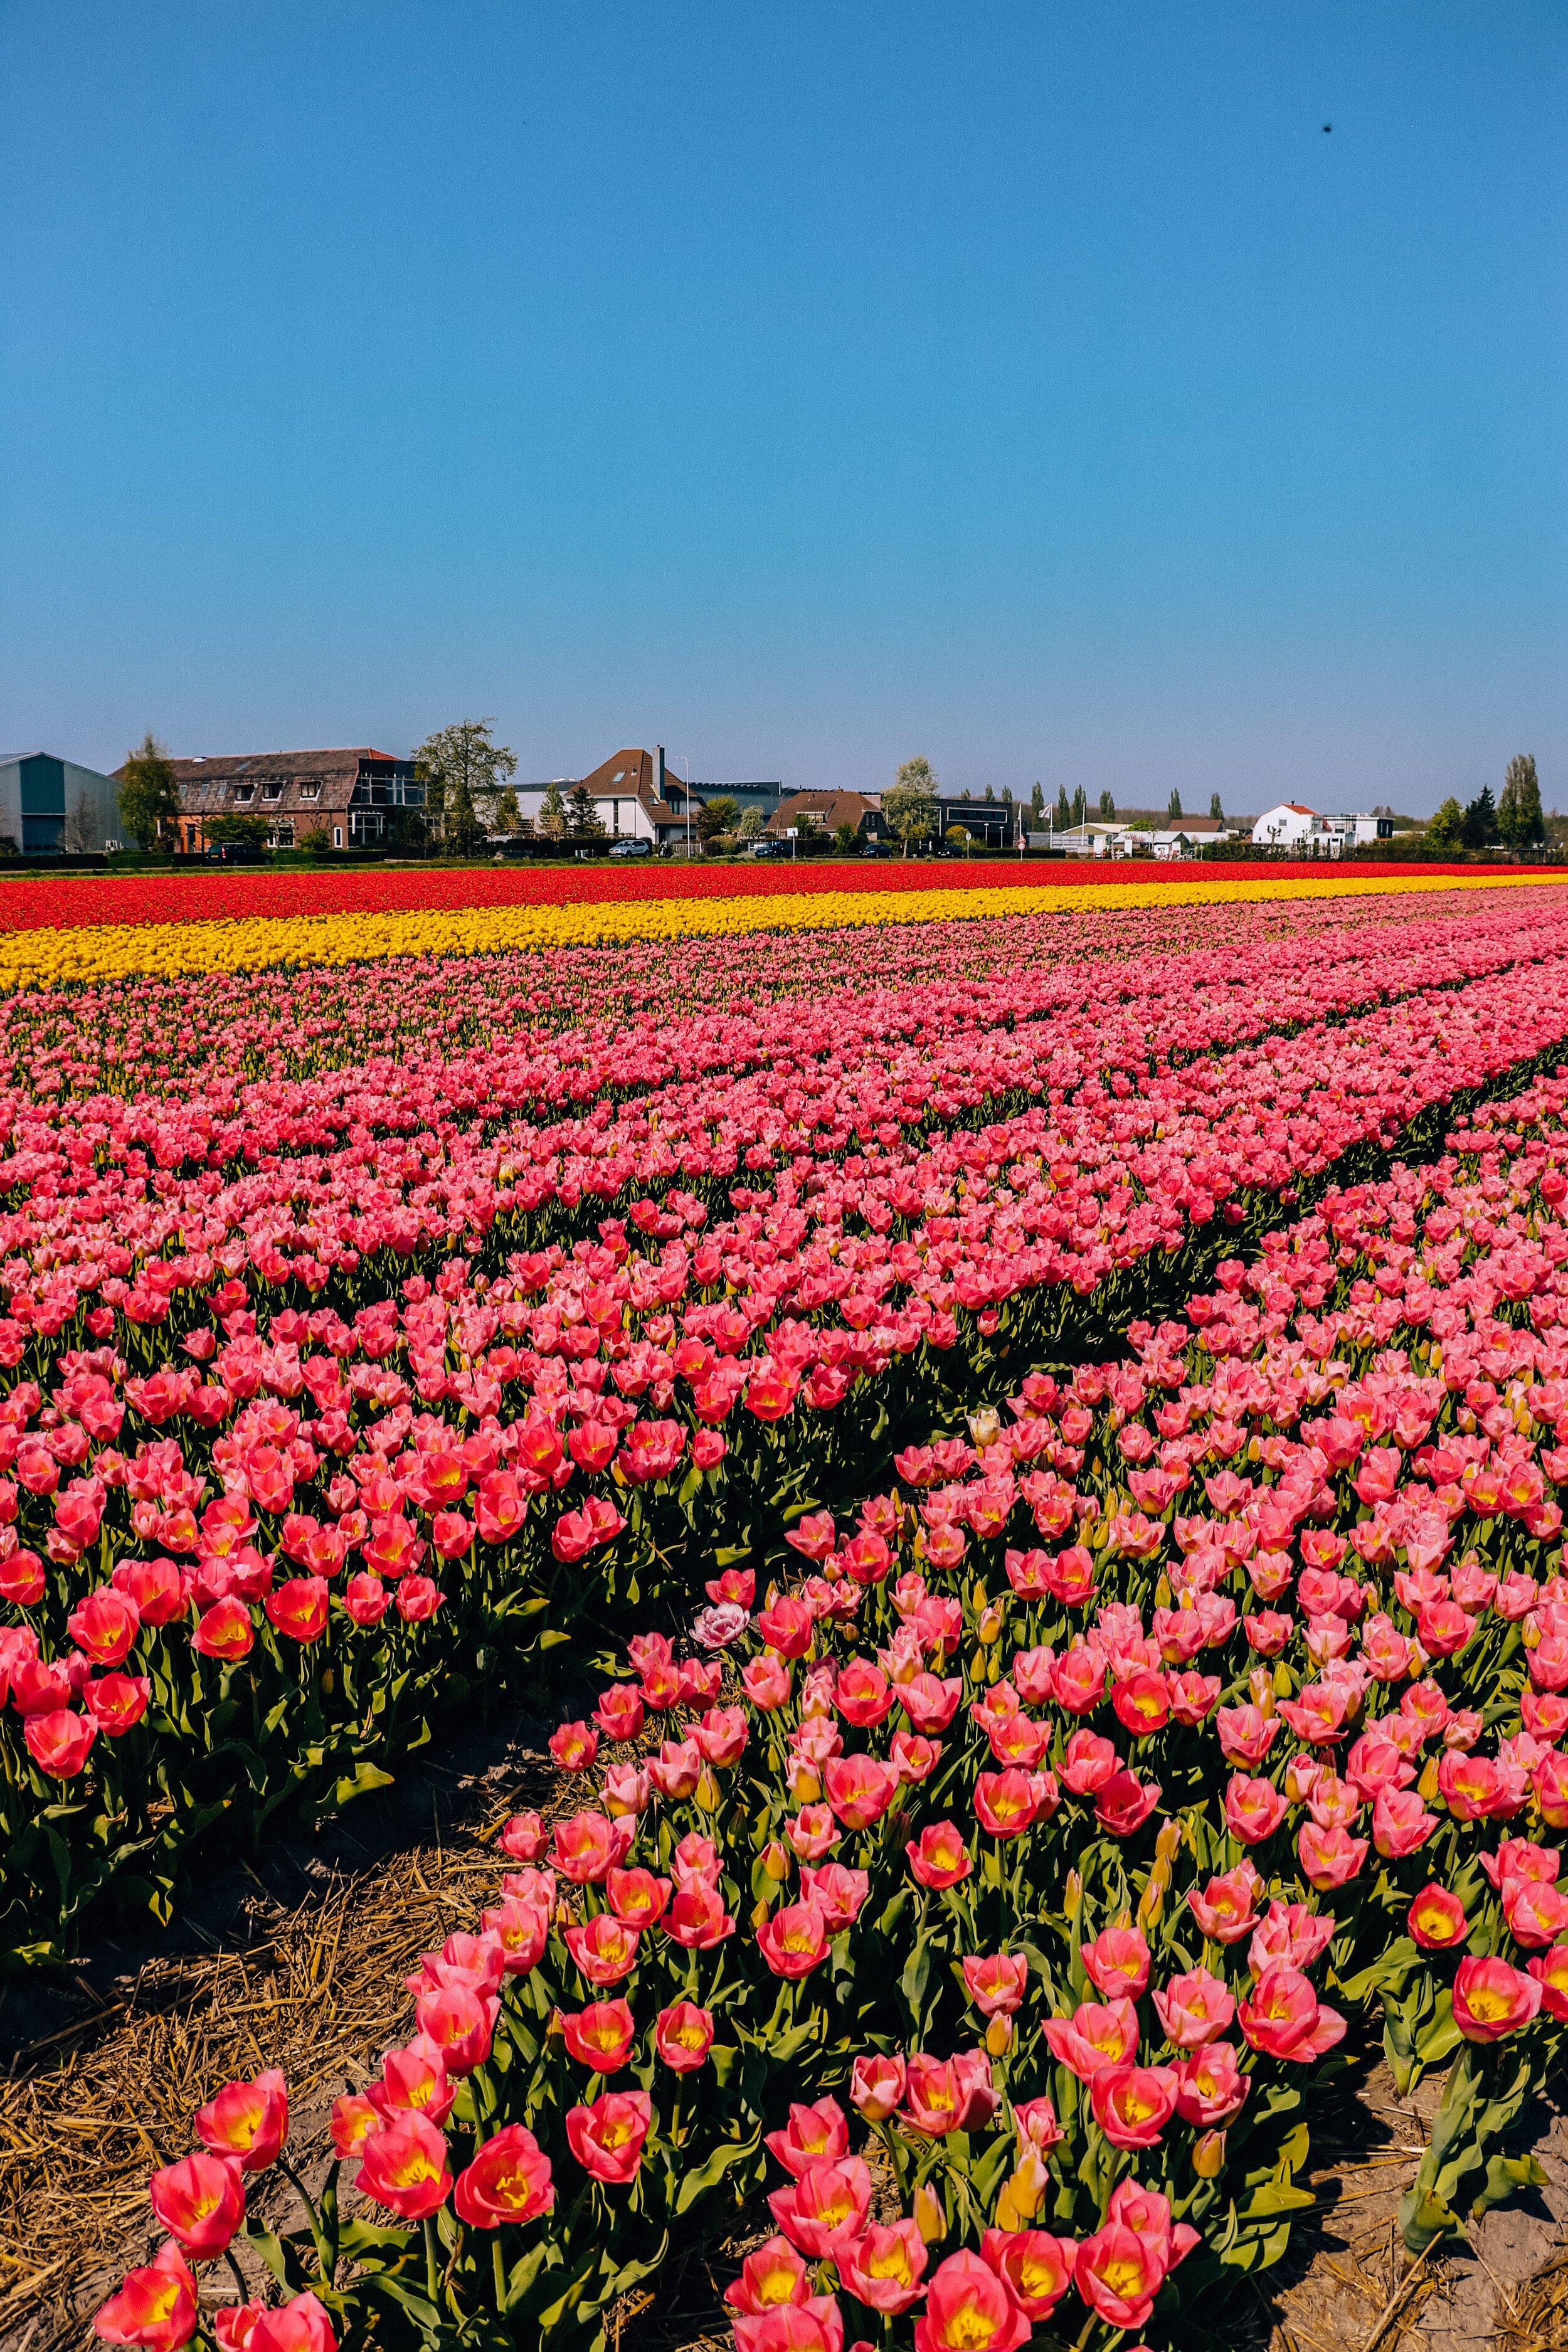 Rows of many colorful pink tulips in Lisse